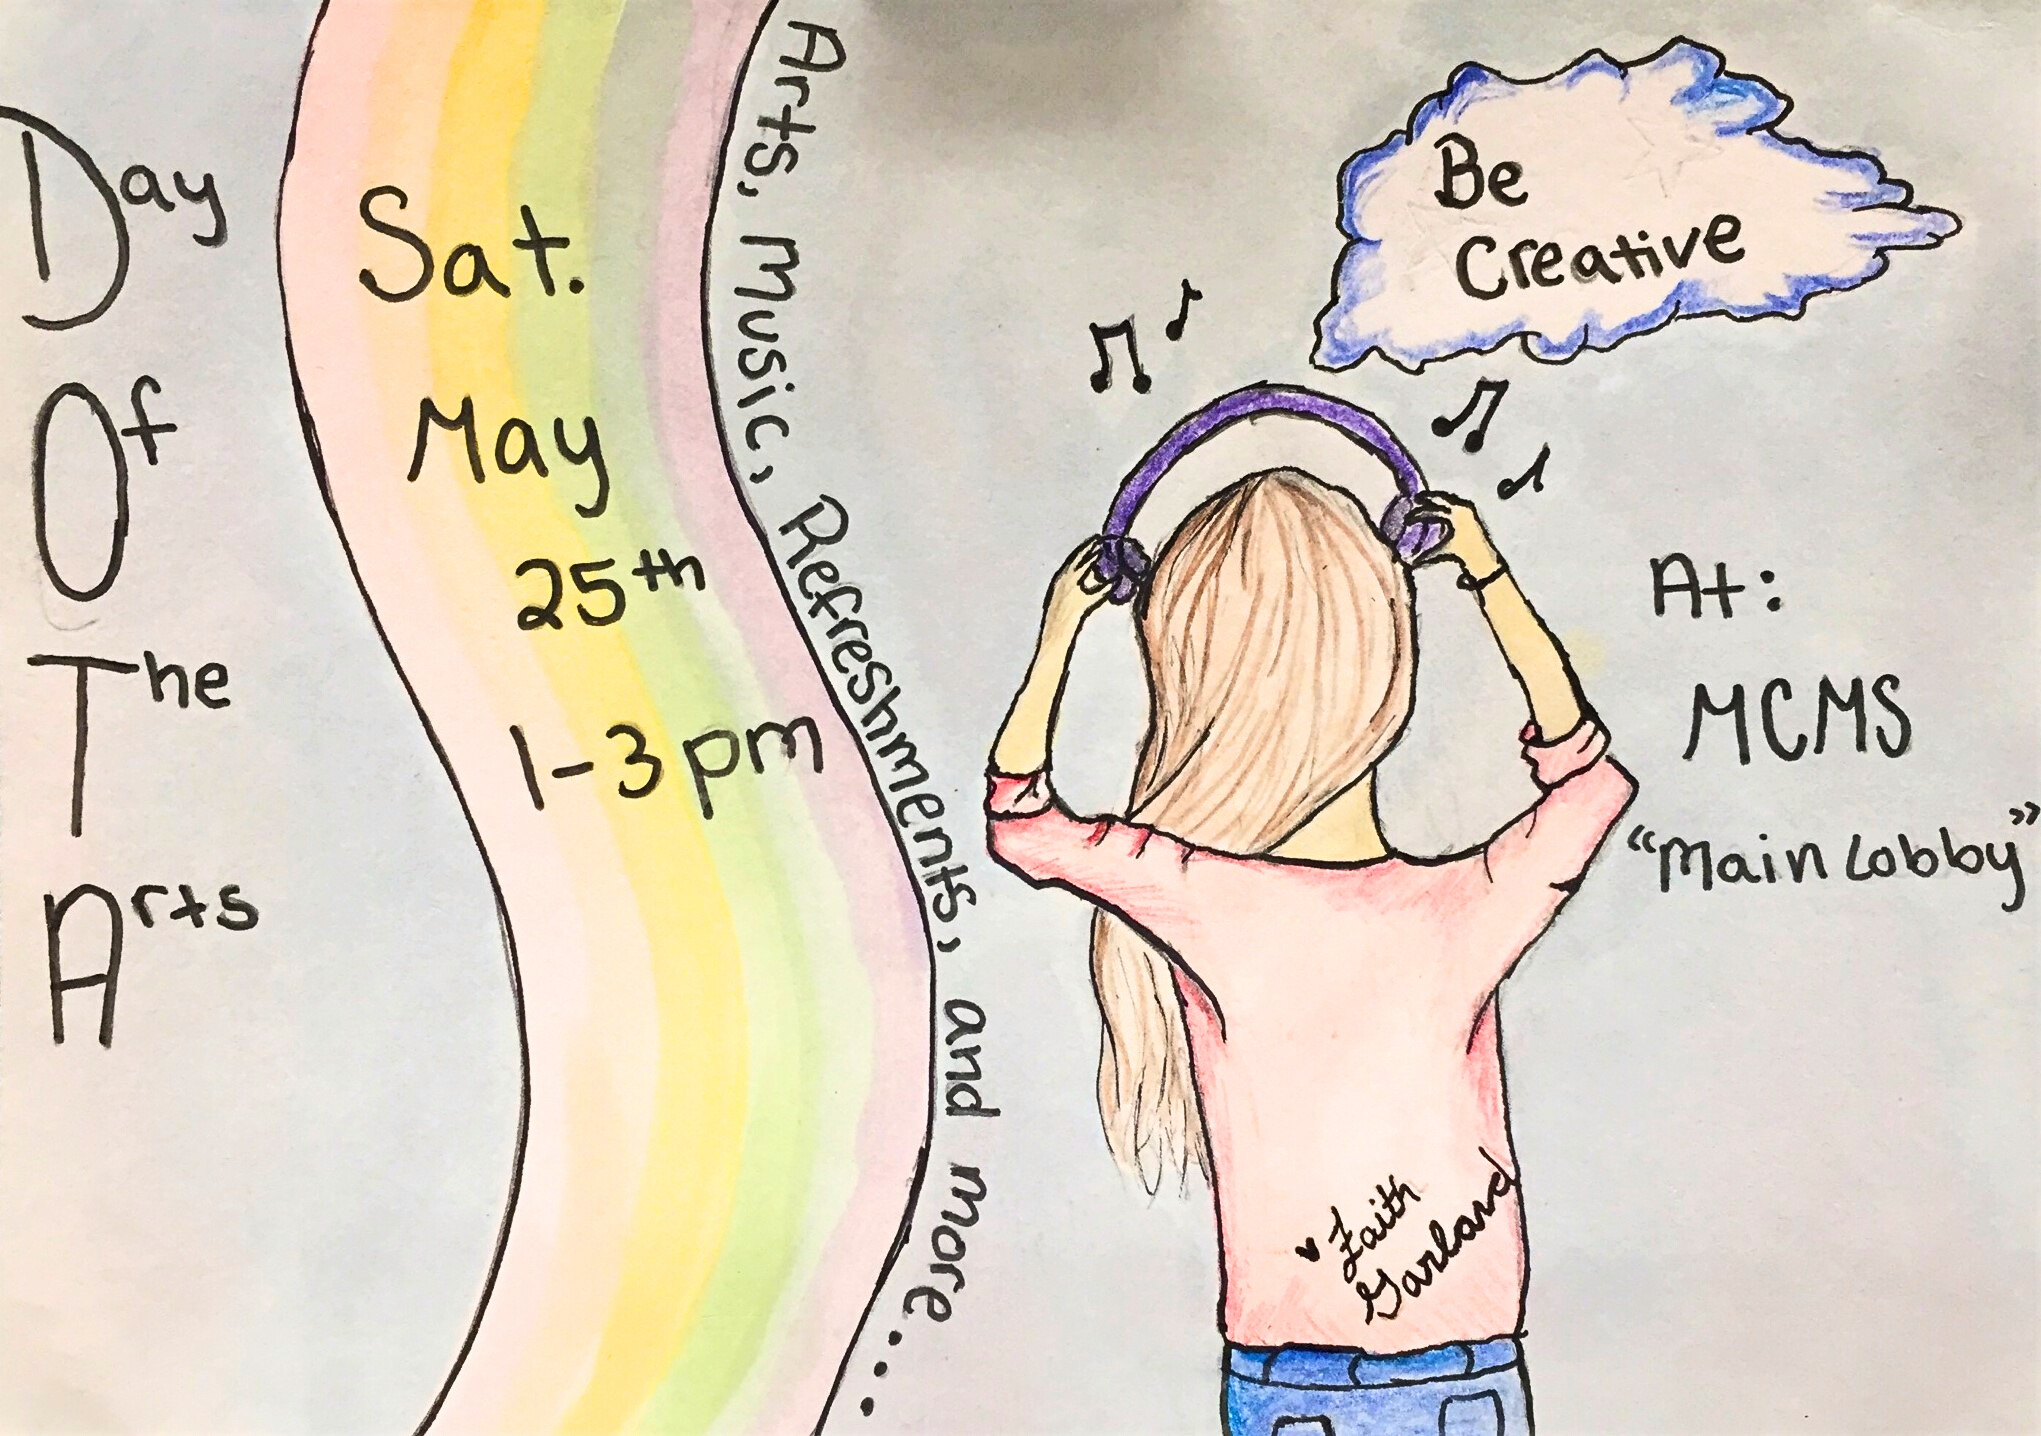 MCMS Day Of The Arts | Saturday, May 25th 1-3PM Banner Image